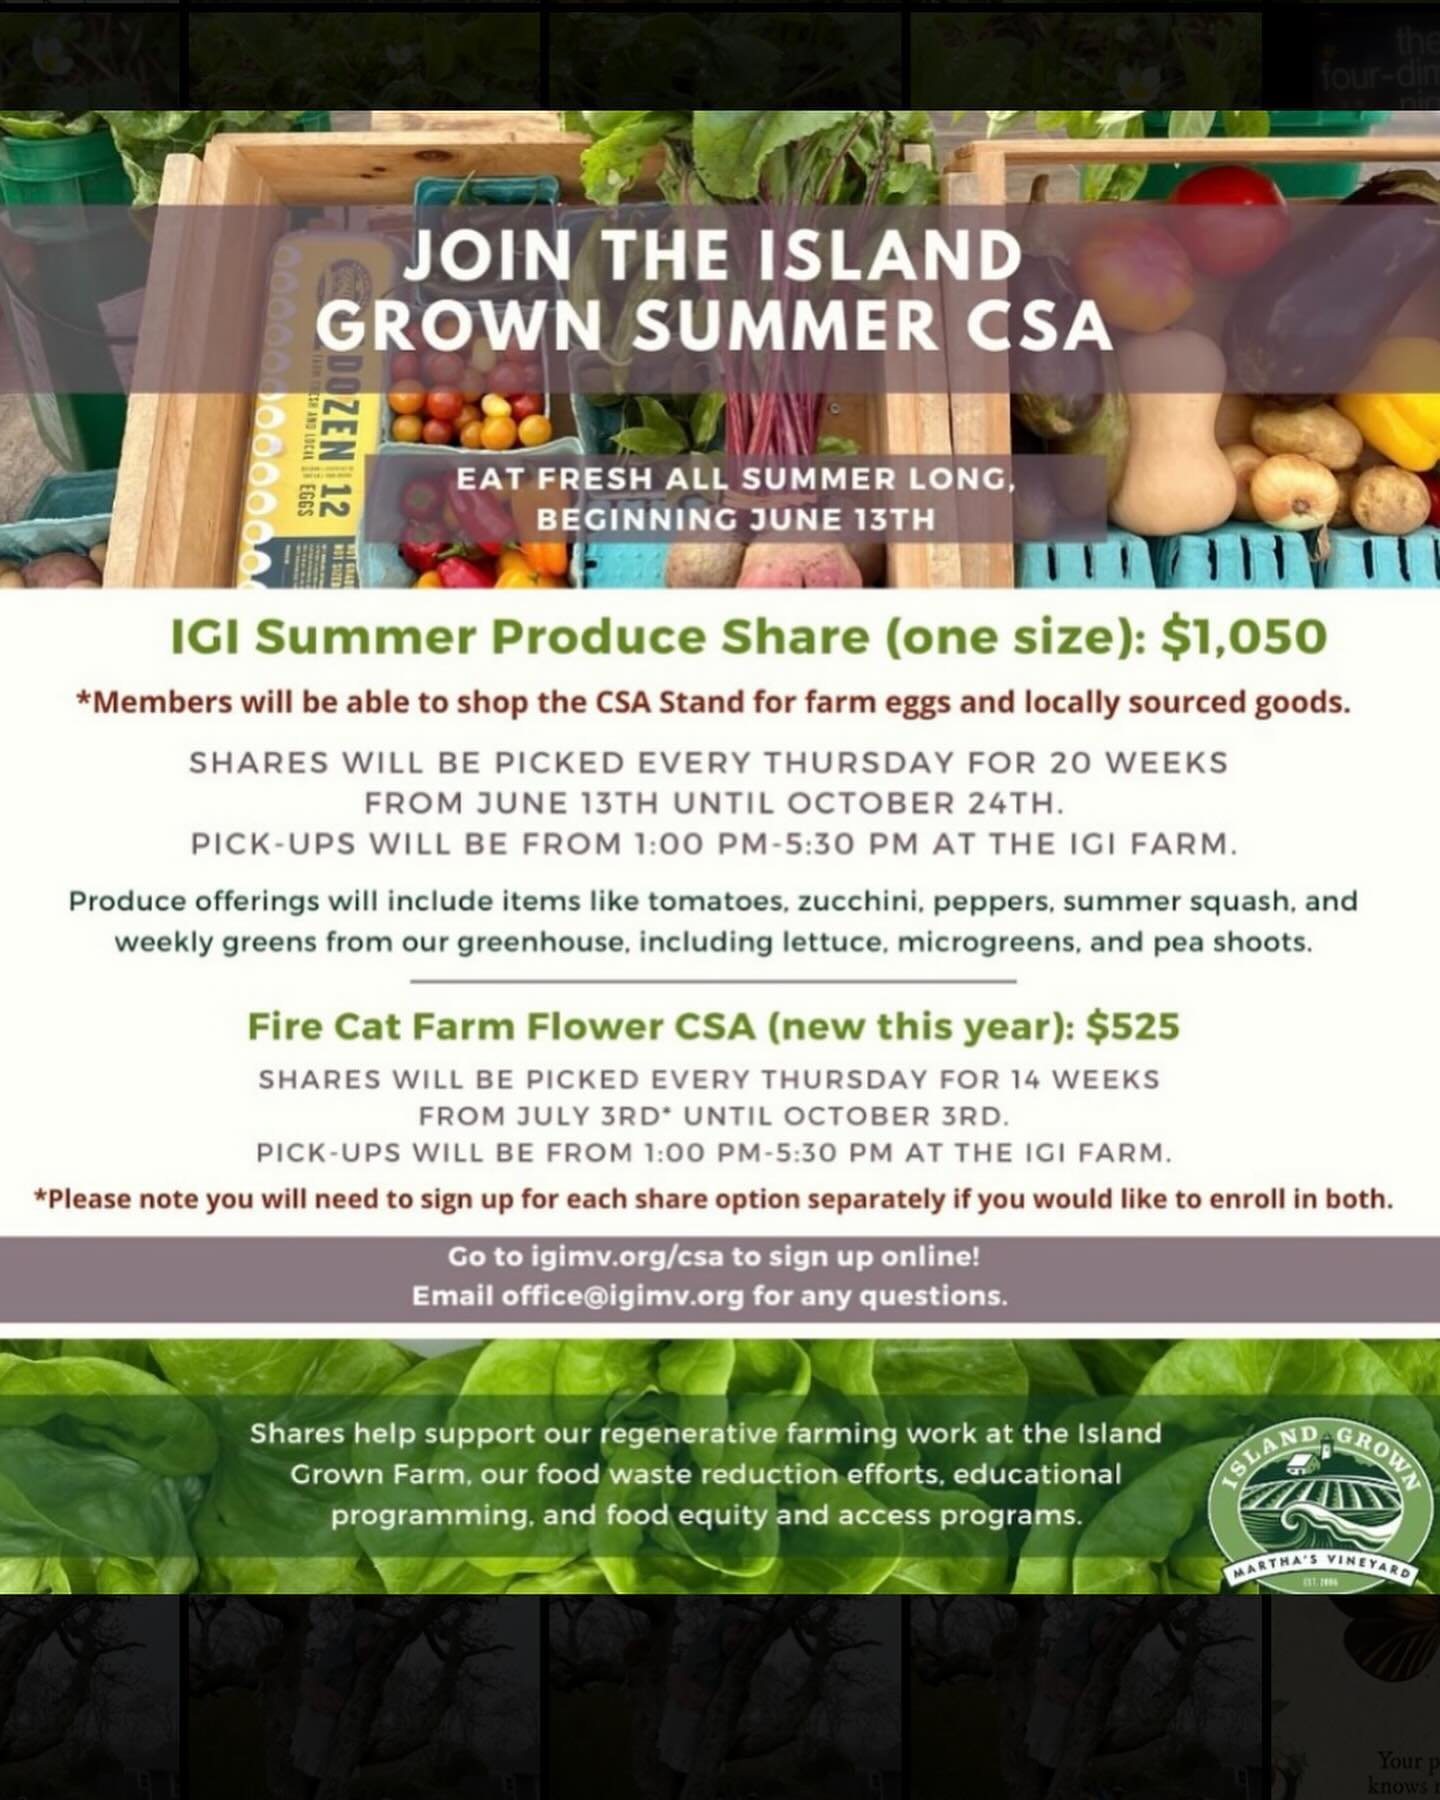 We are so lucky this year to be able to team up with @islandgrowninitiative to supply our flower thru a CSA. We have a limited number of spots so sign up now if you want in! Each week we will create unique fresh cut bouquets. July 3- October 3. Sign 